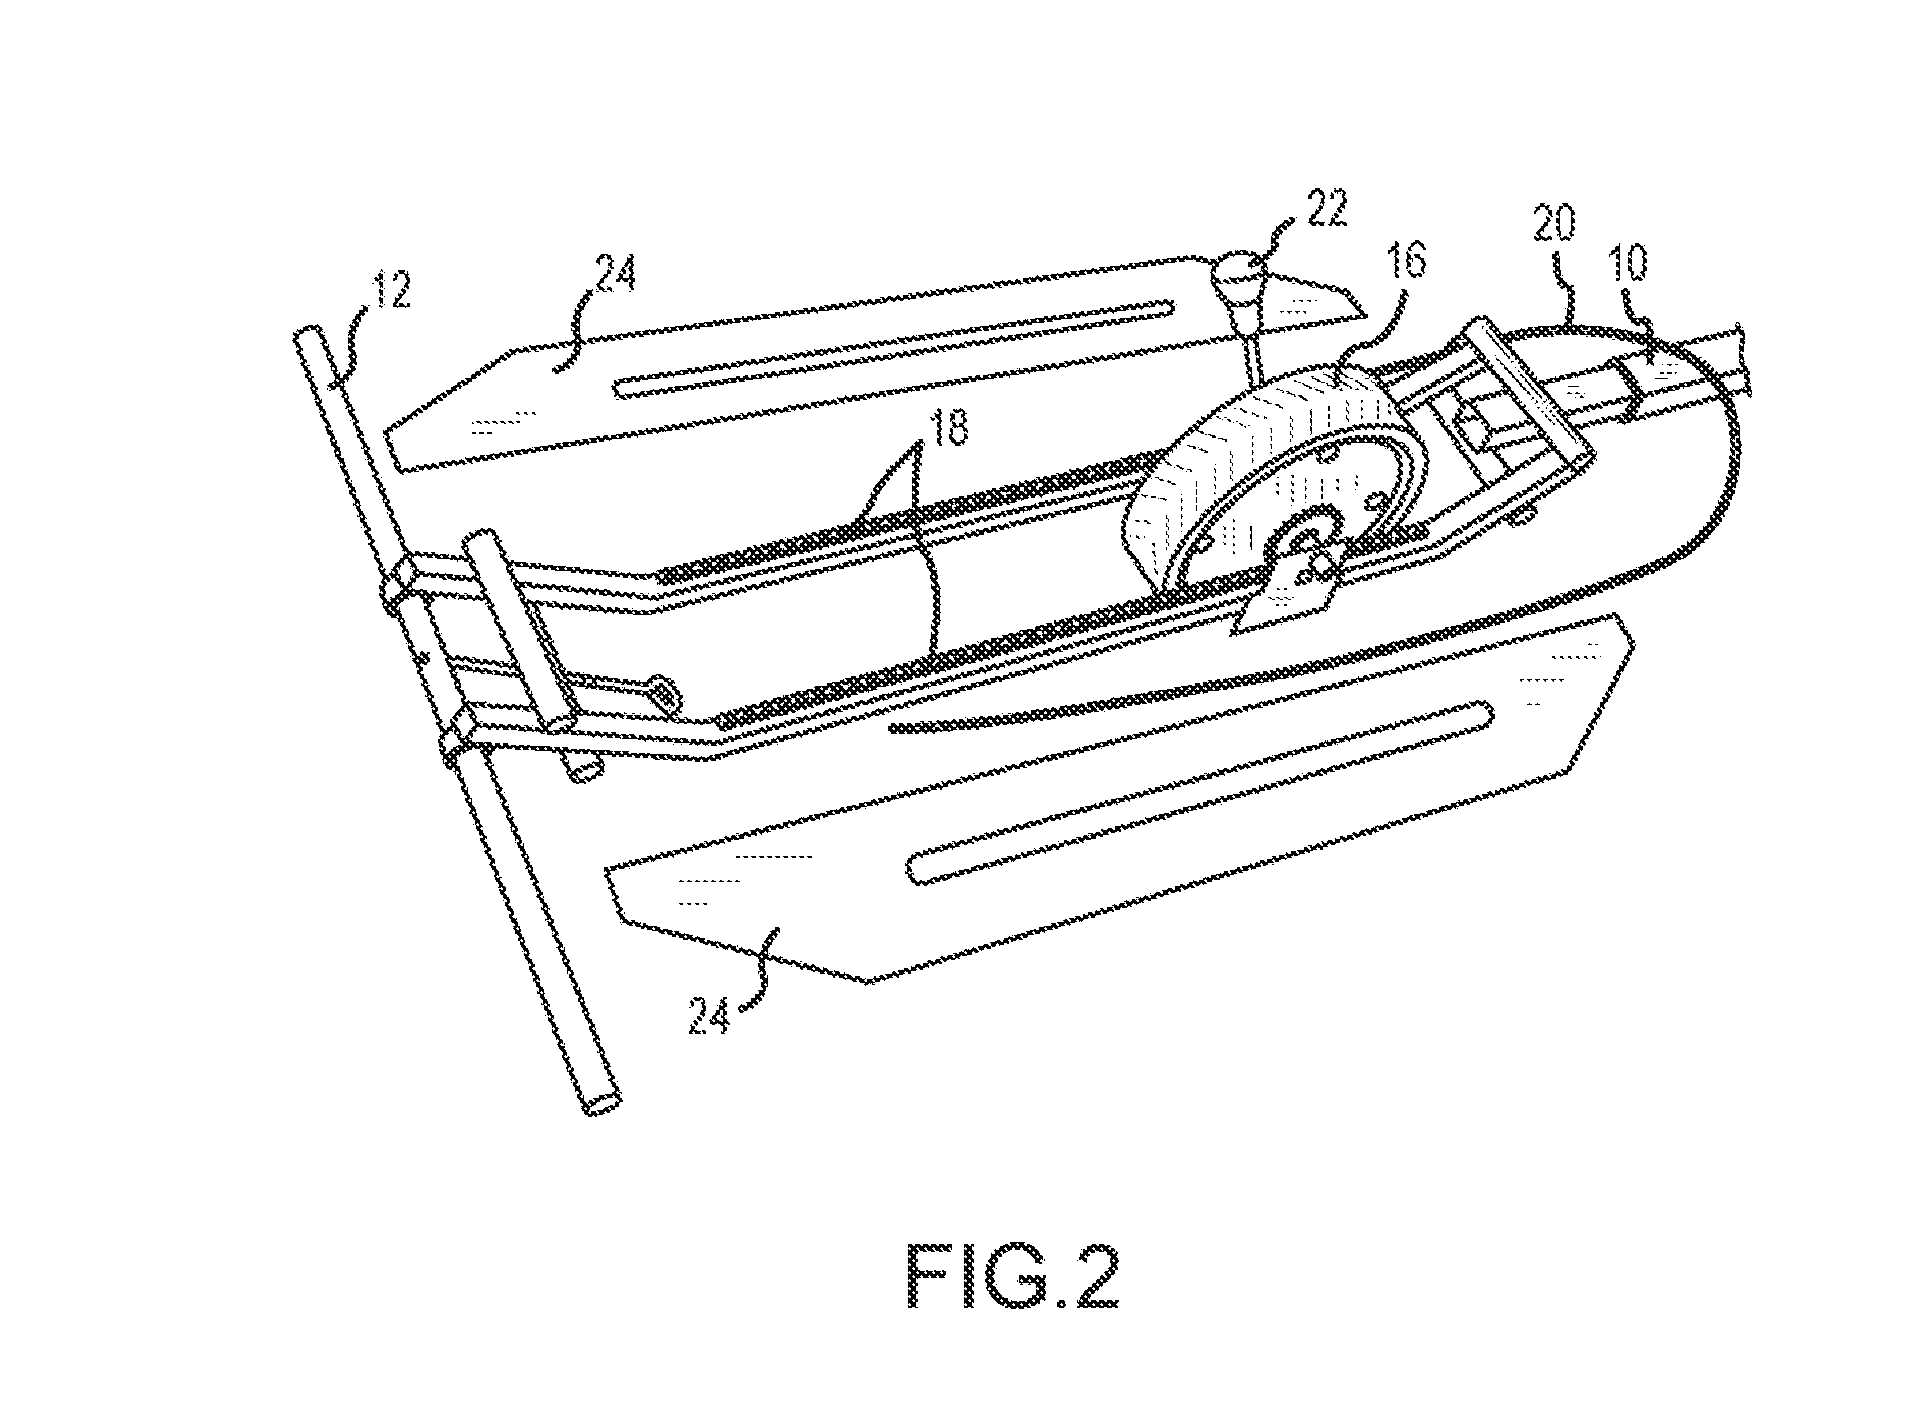 Exercise apparatus with a user controlled, gravity operated shifting mechanism